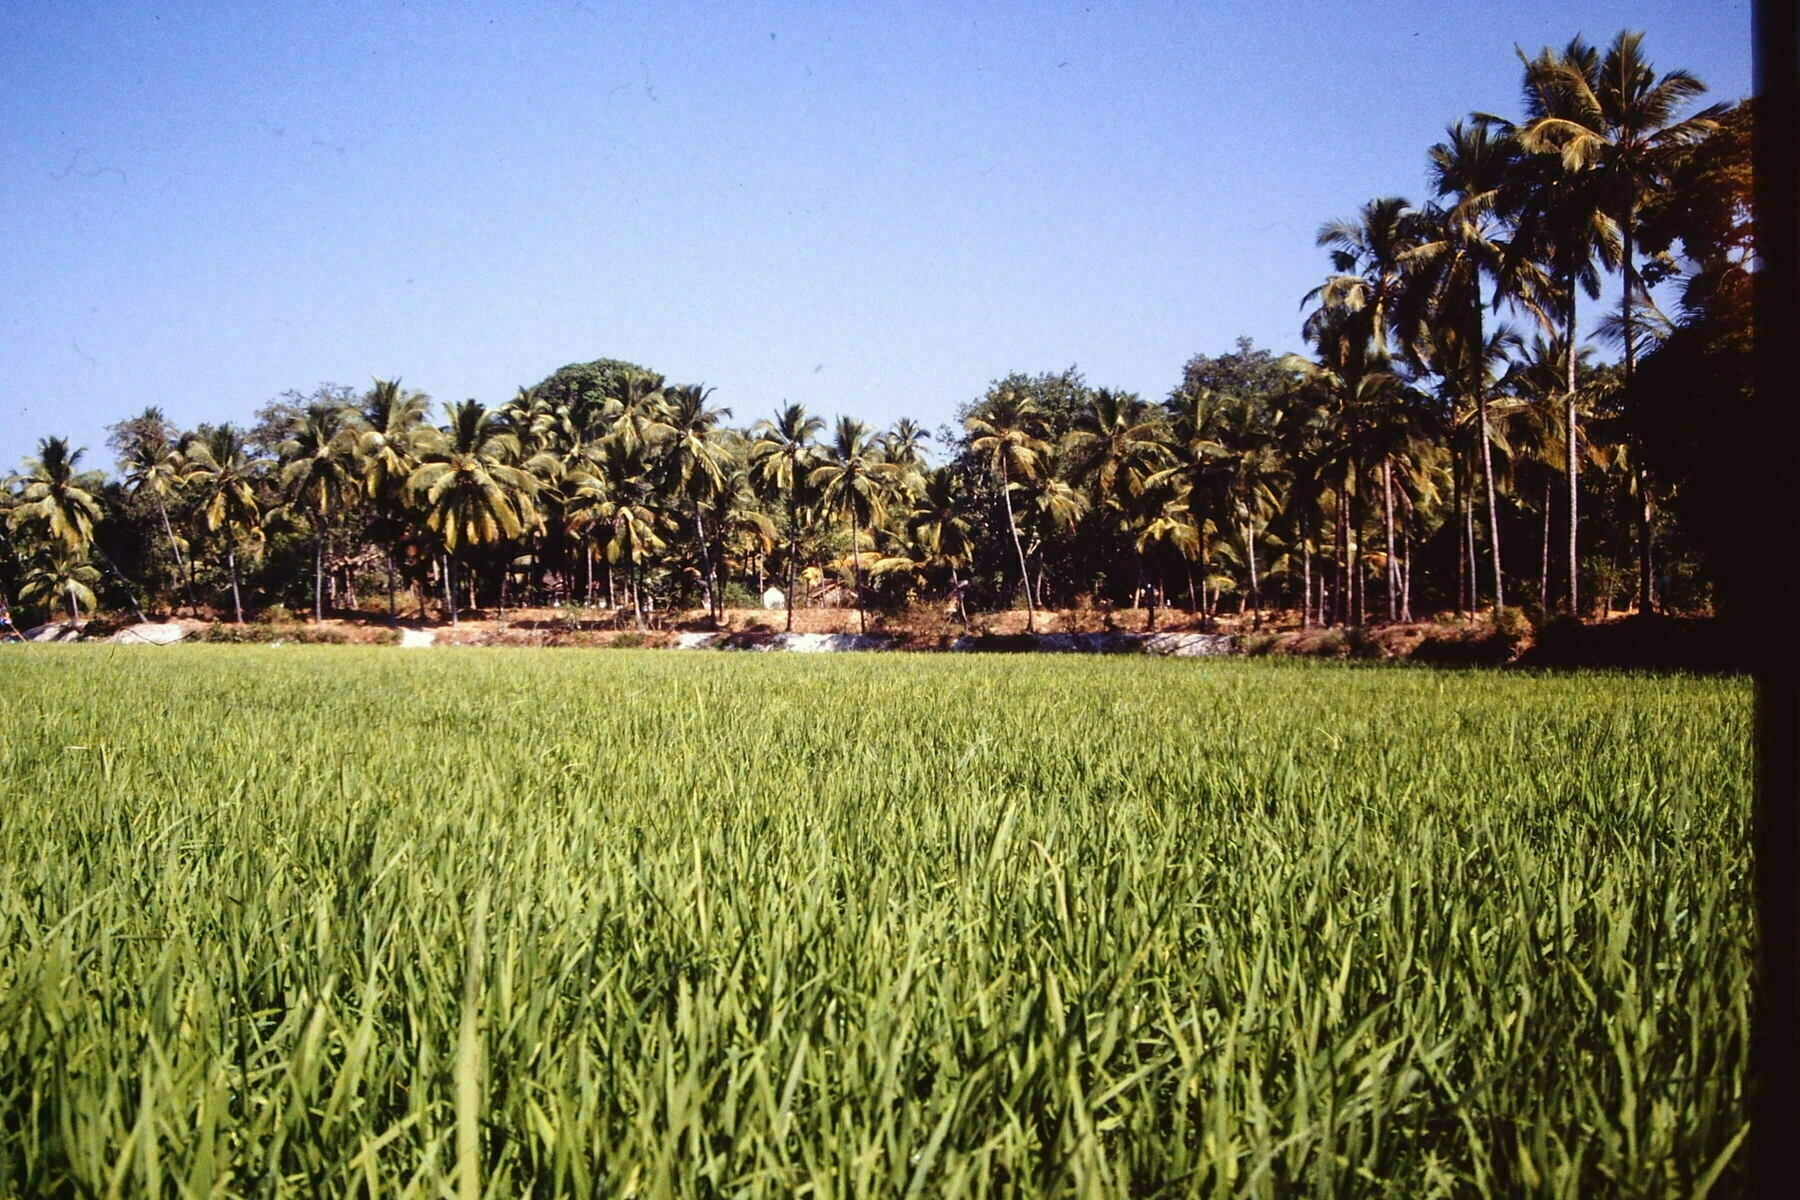 A thick row of palm trees hiding a village underneath them. In the foreground is what looks like thick rice fields.